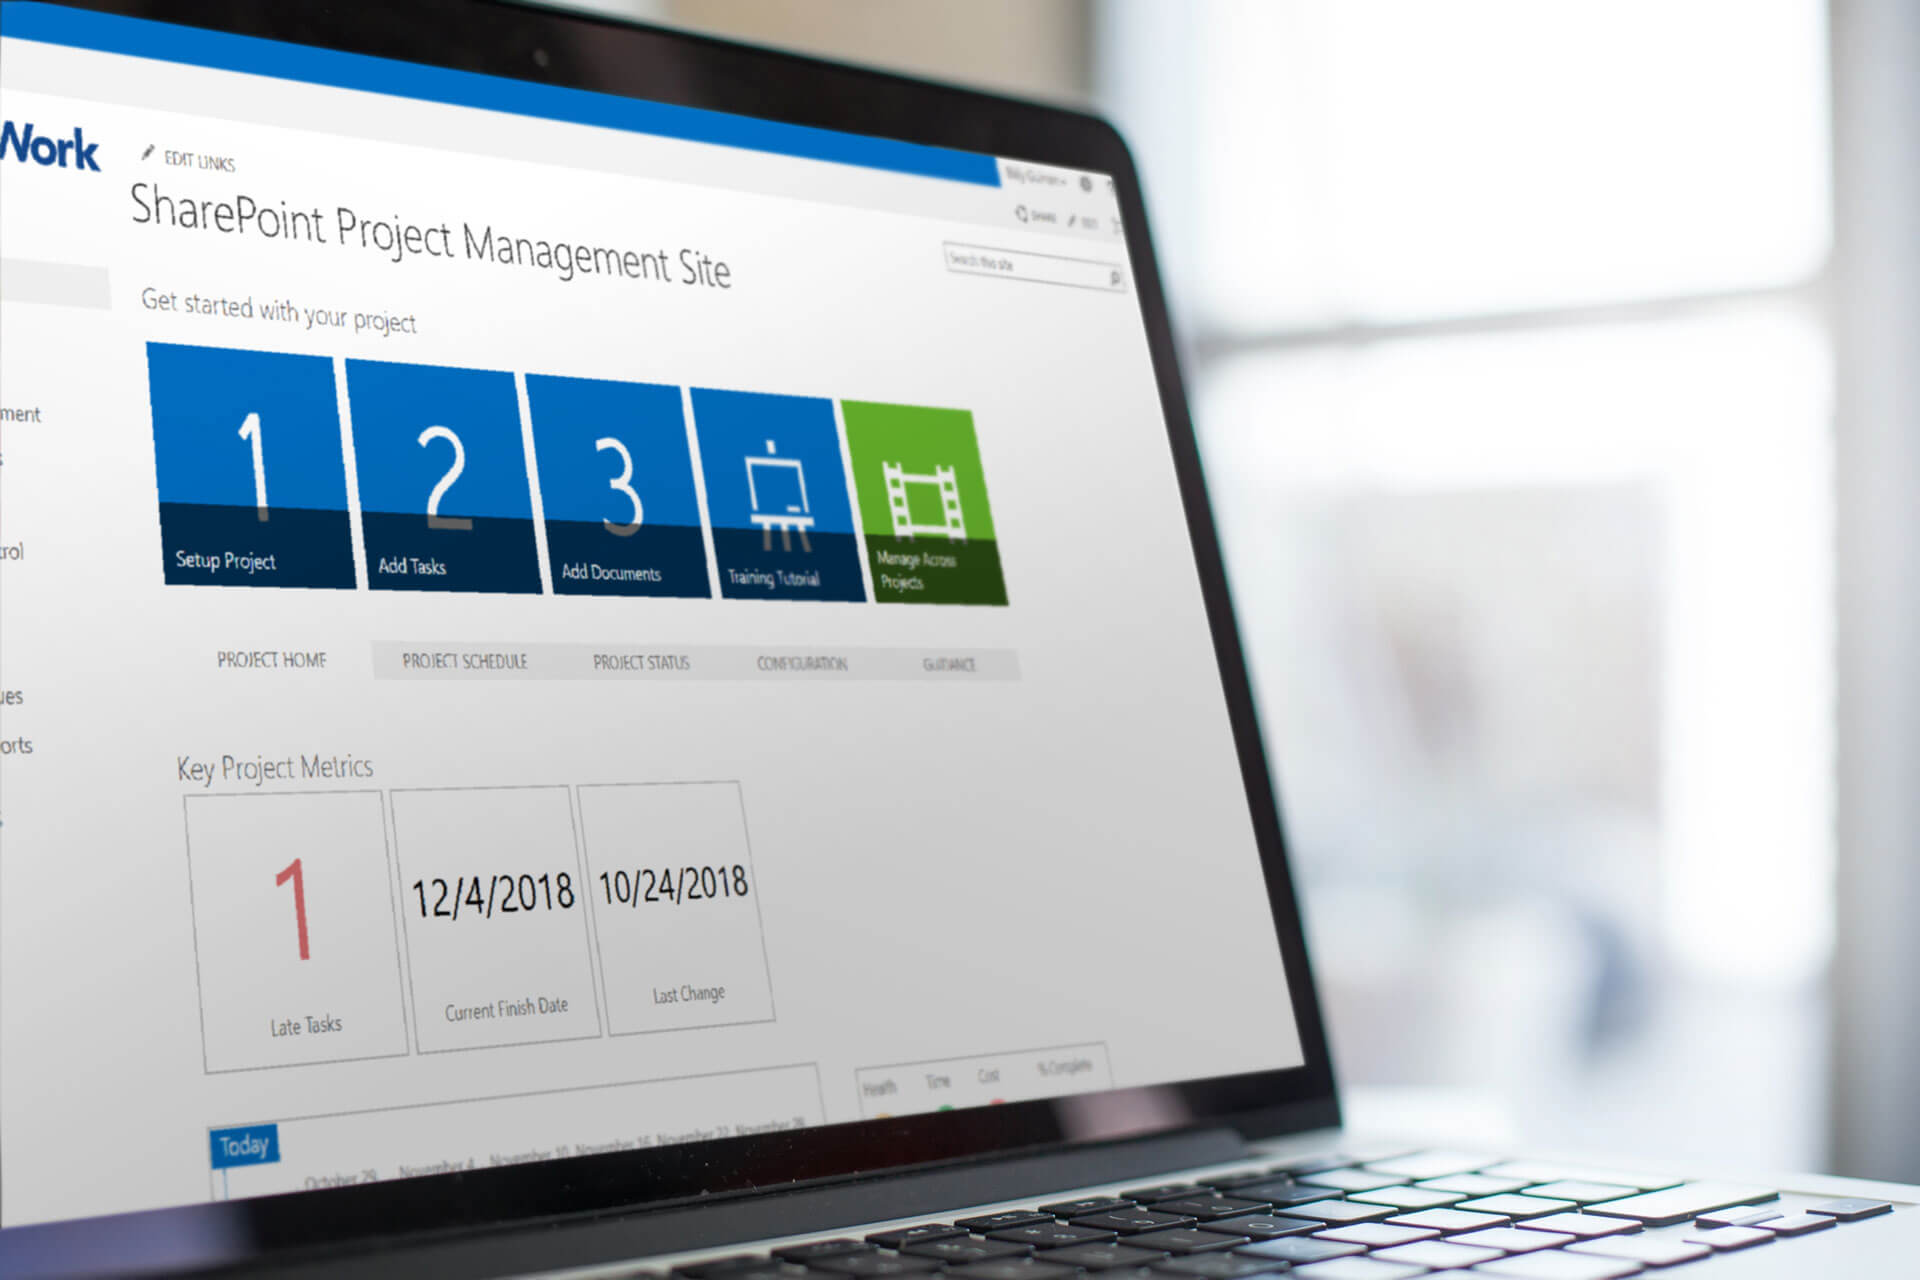 SharePoint vs. Free Project Management Template vs. BrightWork